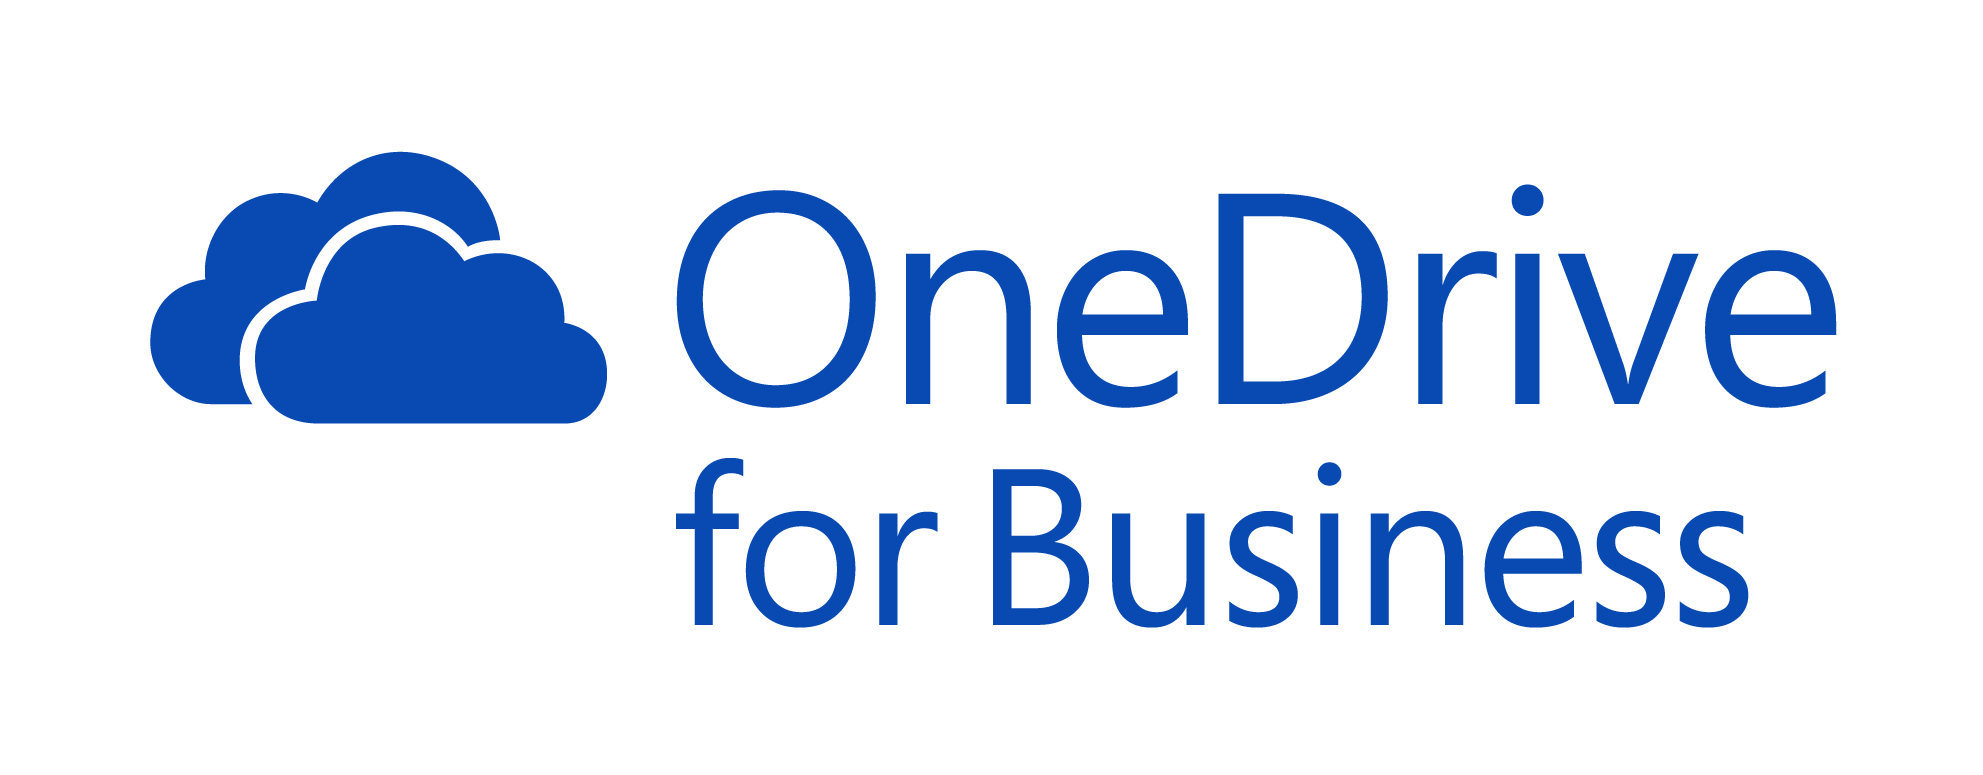 Microsoft One Drive Logo - SkyDrive and SkyDrive Pro are now OneDrive and OneDrive for Business